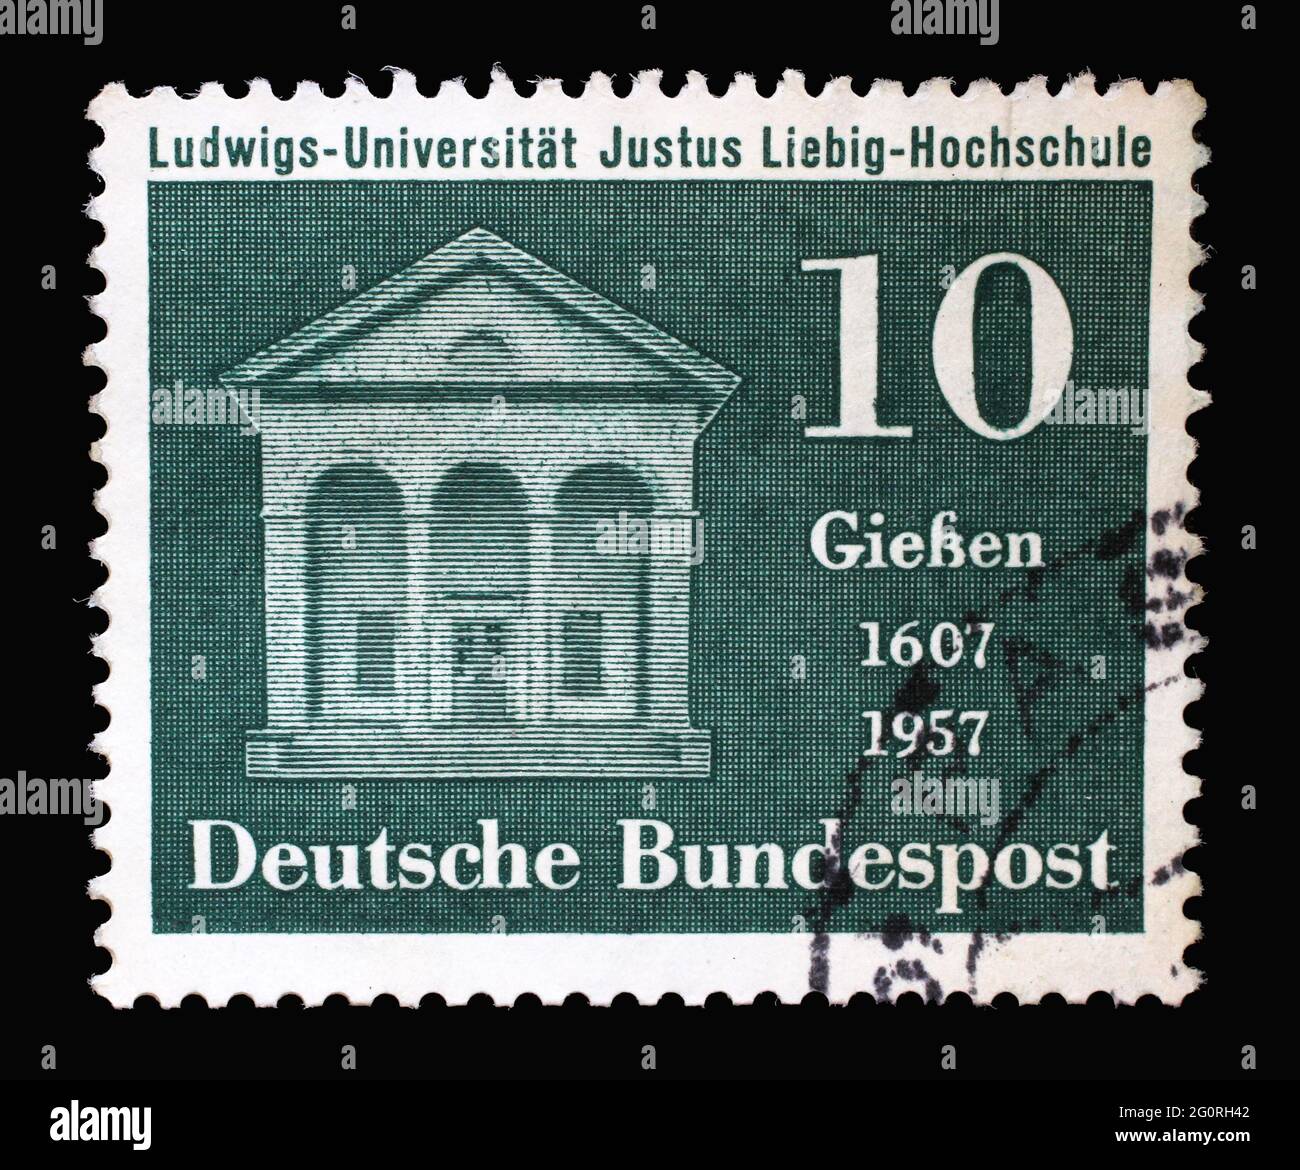 Stamp printed in Germany, shows Liebig Laboratory, 350th Anniversary of the Justus Liebig School at Ludwig University, Giessen, circa 1957 Stock Photo